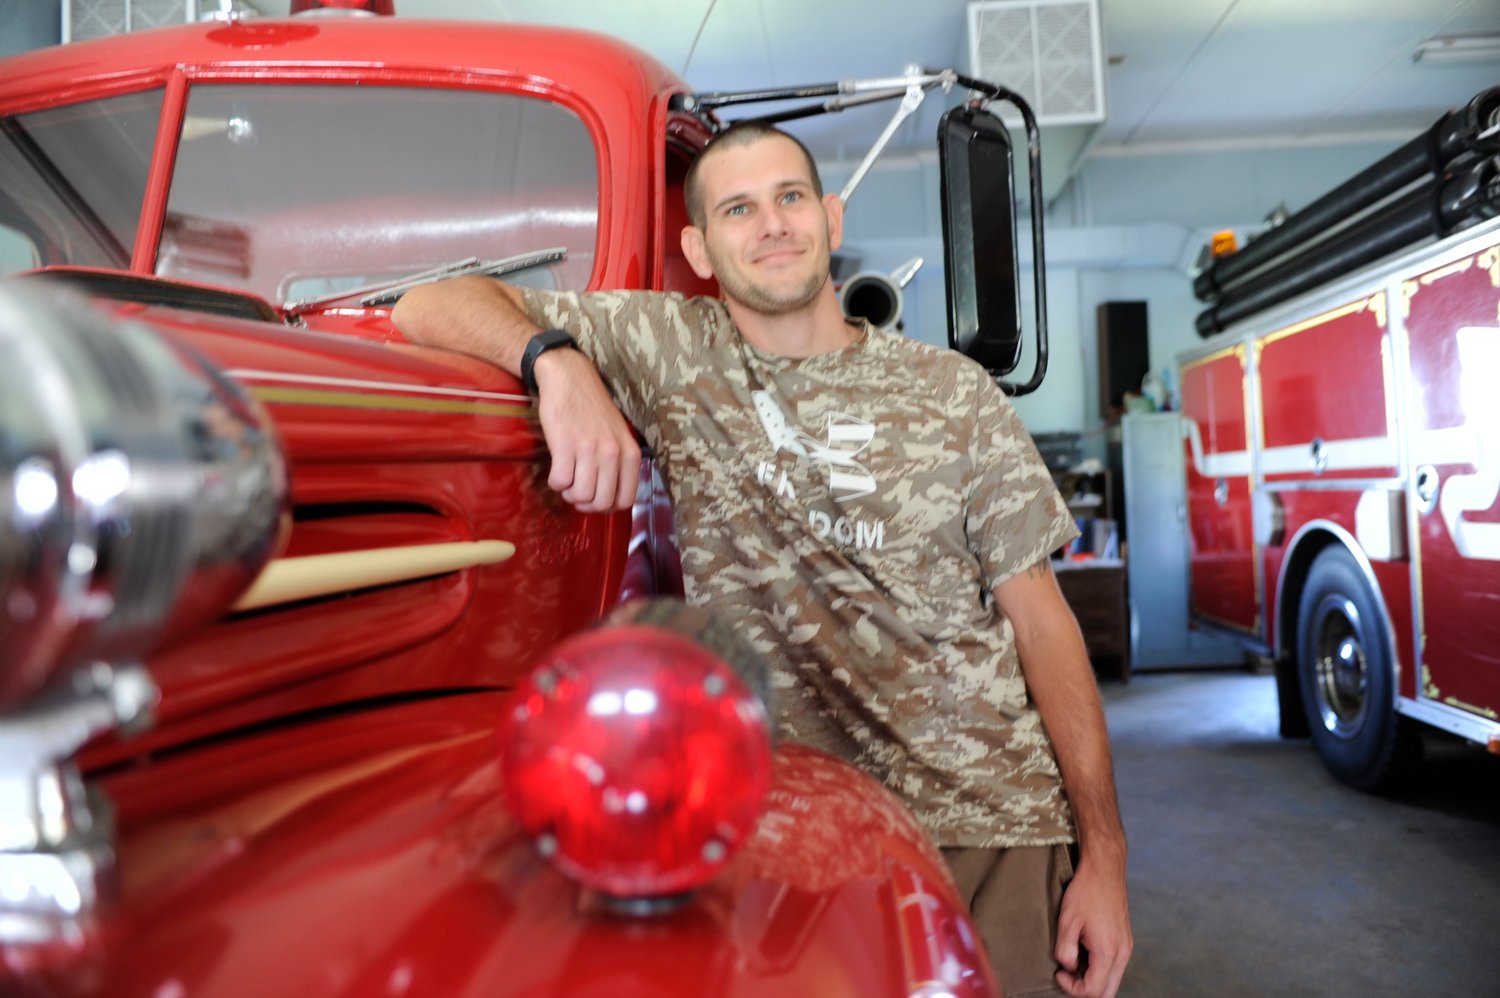 Jesse Campfield, Lava Fire Department’s 28-year old chief, joined the all-volunteer department as a 17-year-old in 2011. He is pictured with the department’s 1947 Ford engine apparatus.